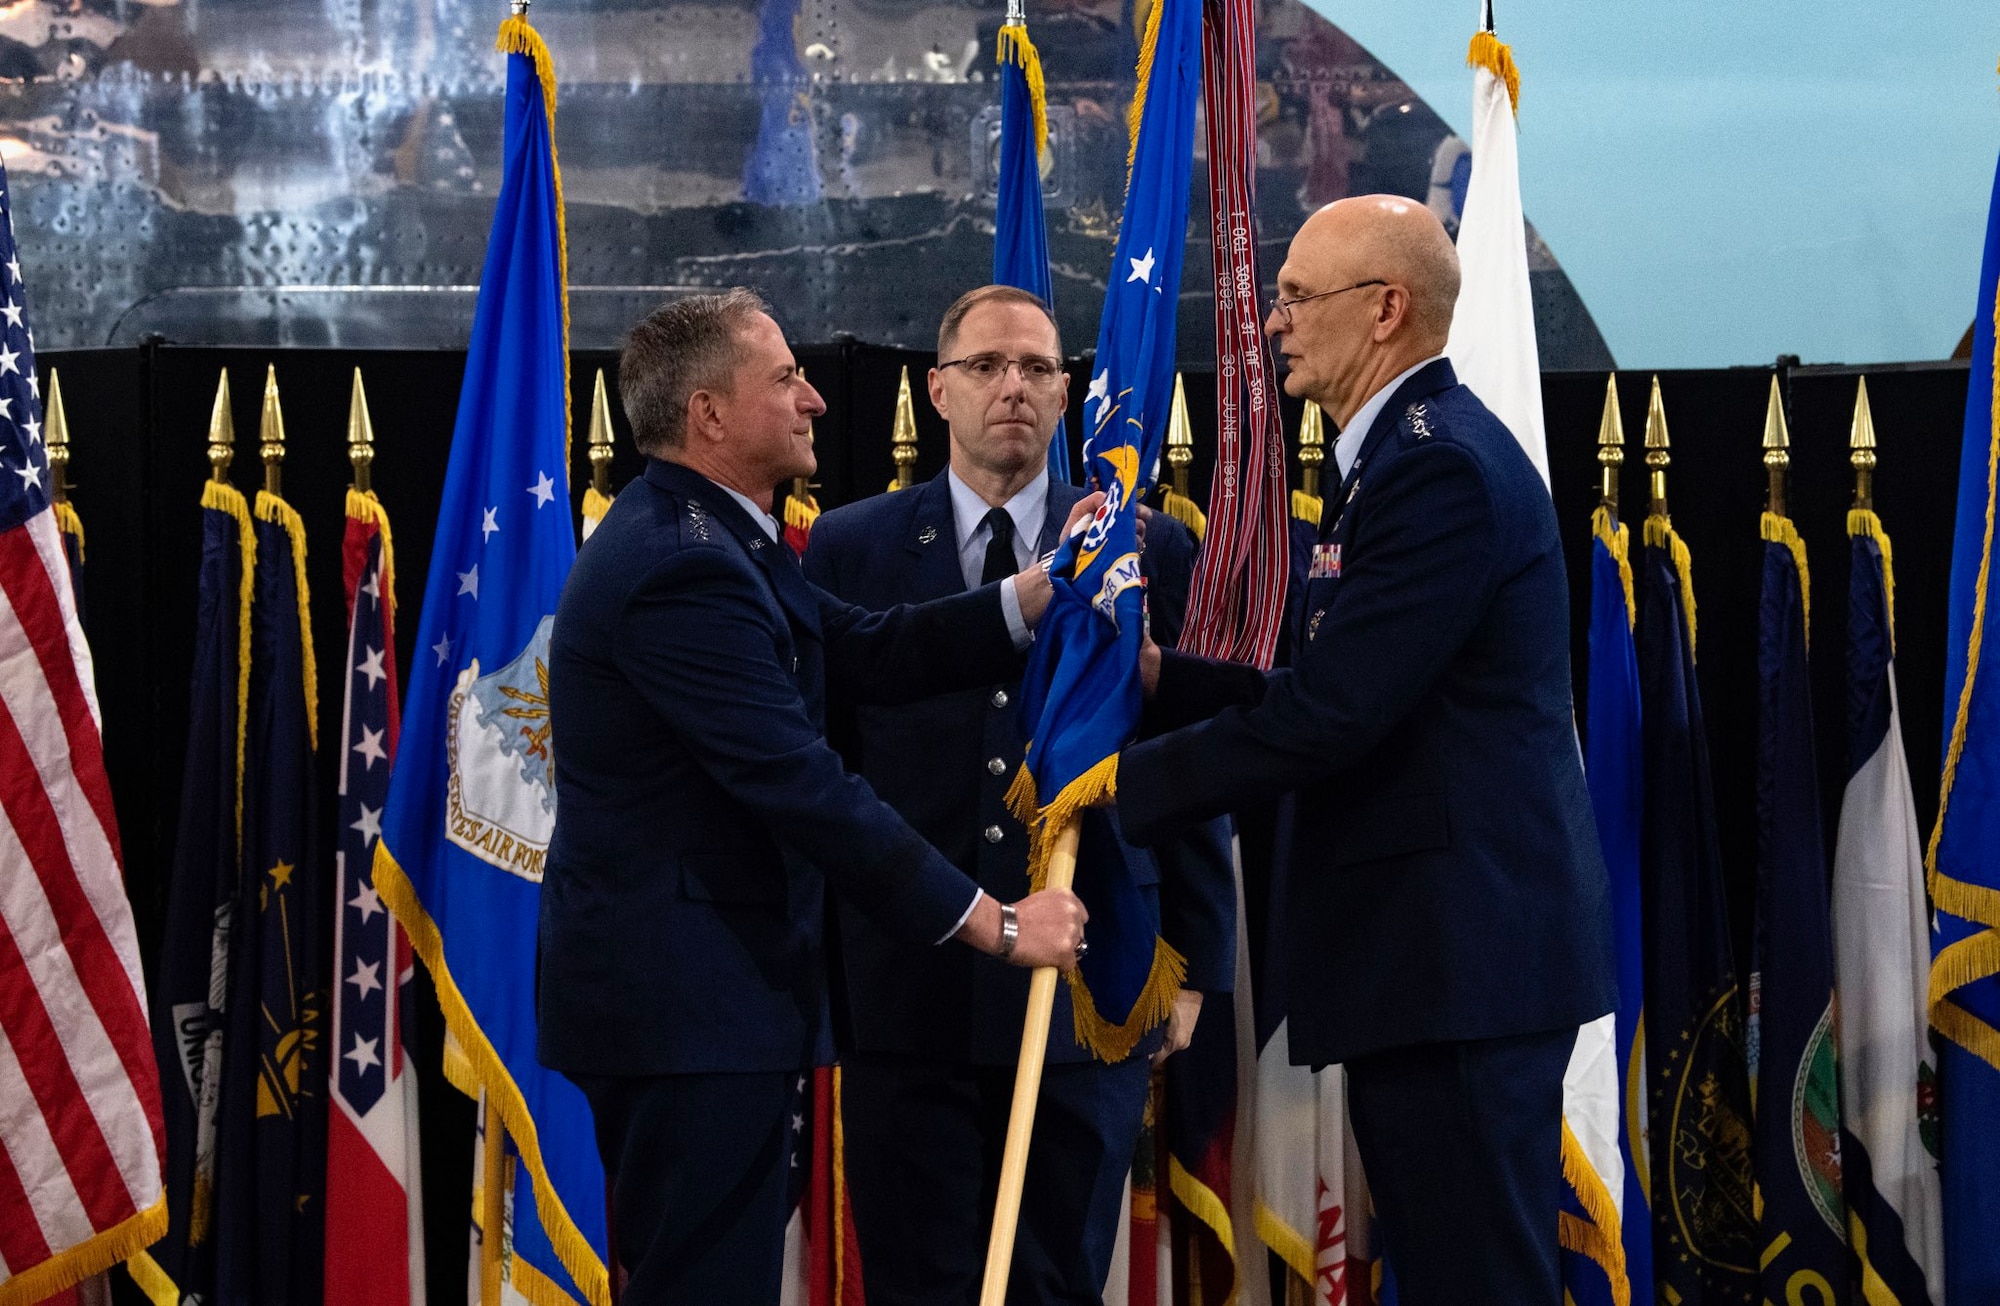 Air Force Chief of Staff Gen. David L. Goldfein passes the flag to Gen. Arnold W. Bunch, Jr. as Bunch assumes command of Air Force Materiel Command during a ceremony at the National Museum of the United States Air Force, Wright-Patterson Air Force Base, Ohio, May 31, 2019. Bunch takes command of Air Force Materiel Command after serving as the Deputy to the Assistant Secretary of the Air Force for Acquisition, Technology, and Logistics at the Pentagon. (U.S. Air Force photo/Scott M. Ash)